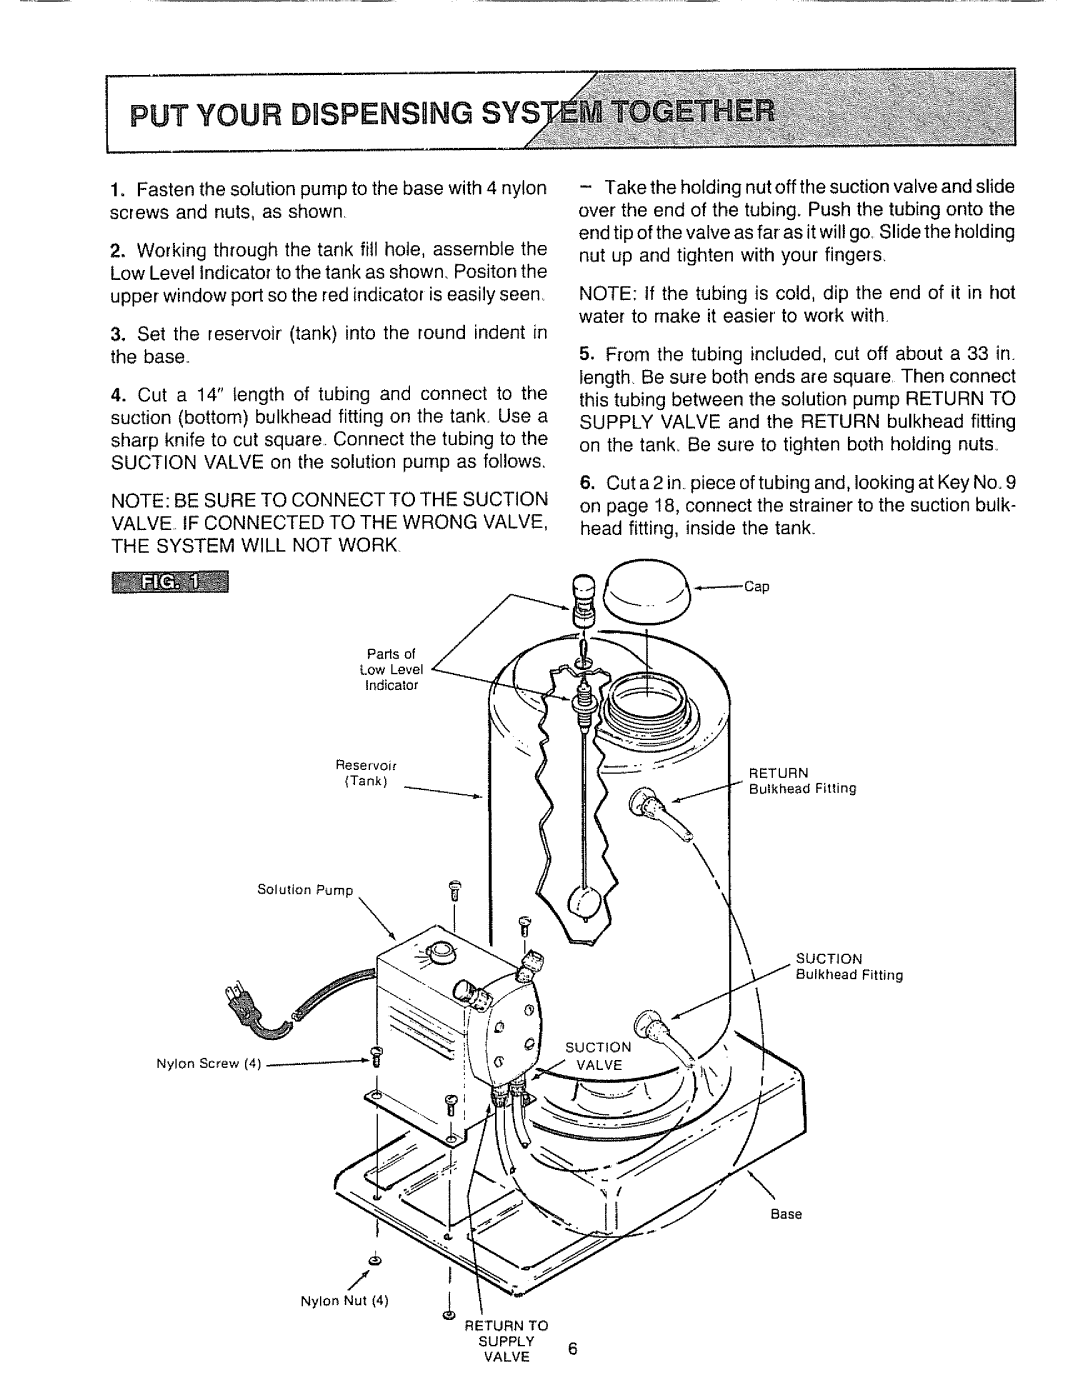 Sears 625.34929 owner manual Put Your Dispensing, Parts of Low Level Indicator Reservort, Tank Solution Pump Nylon Screw 